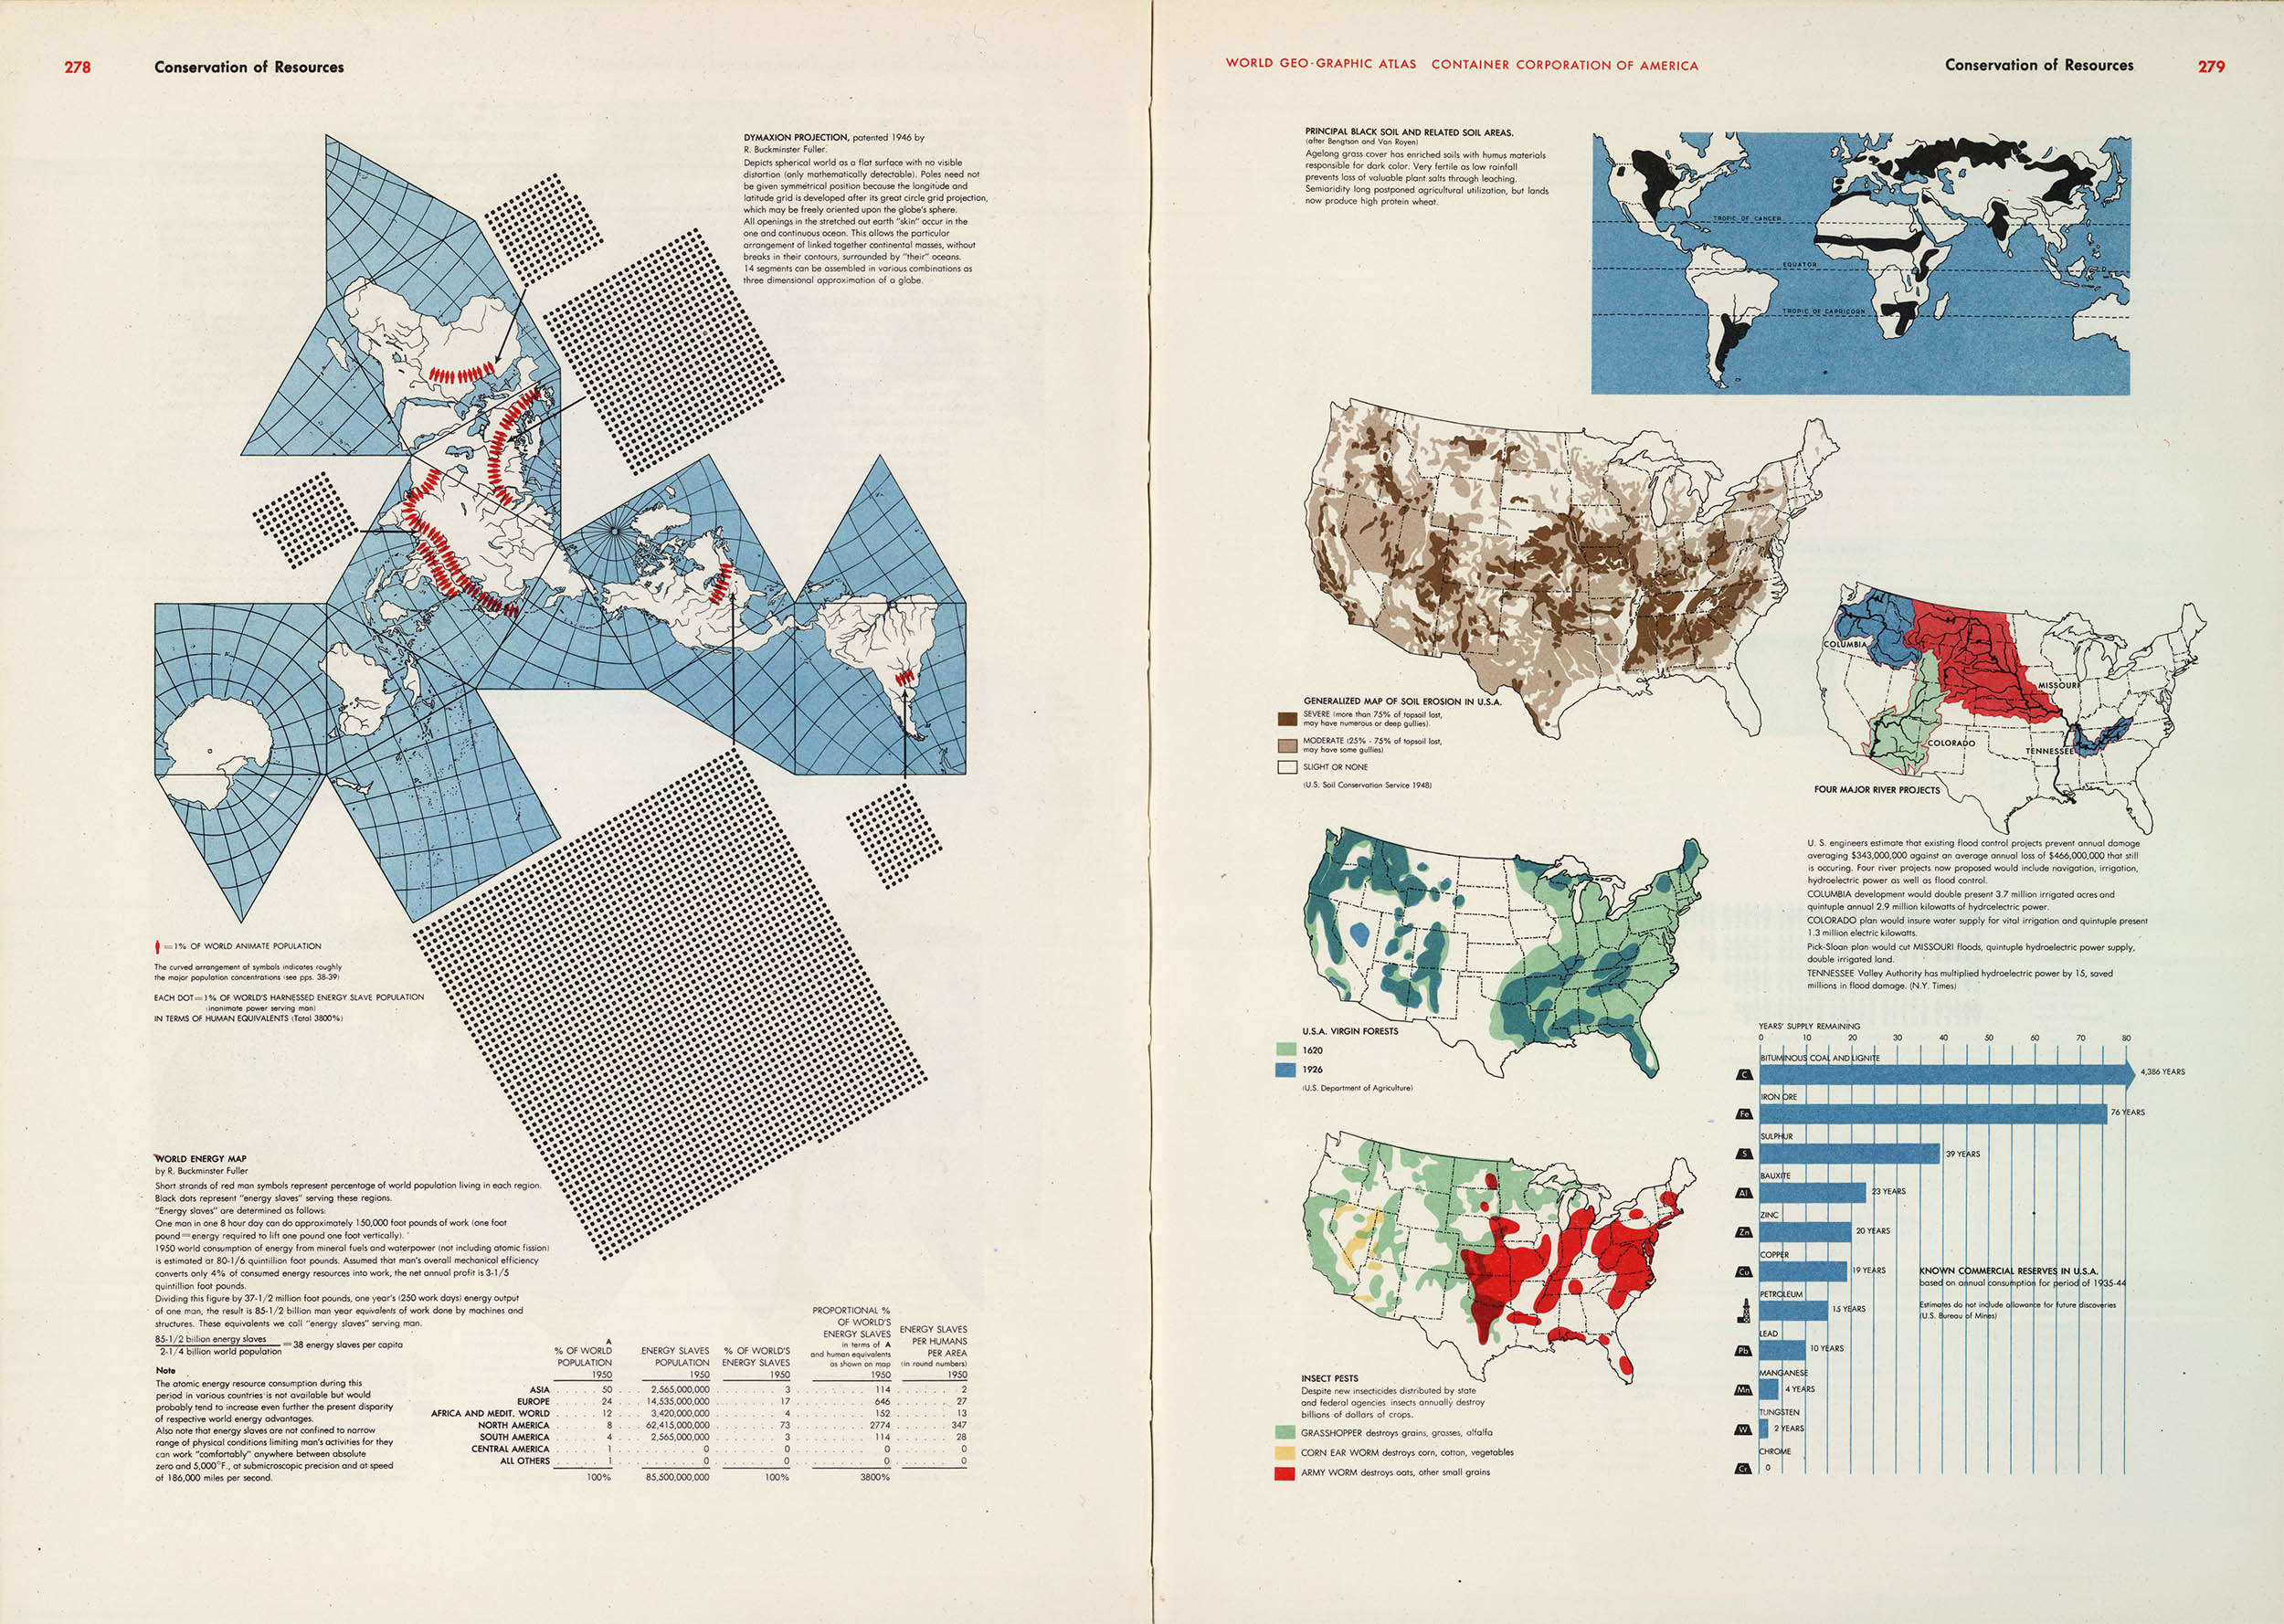 The World Geo-Graphical Atlas